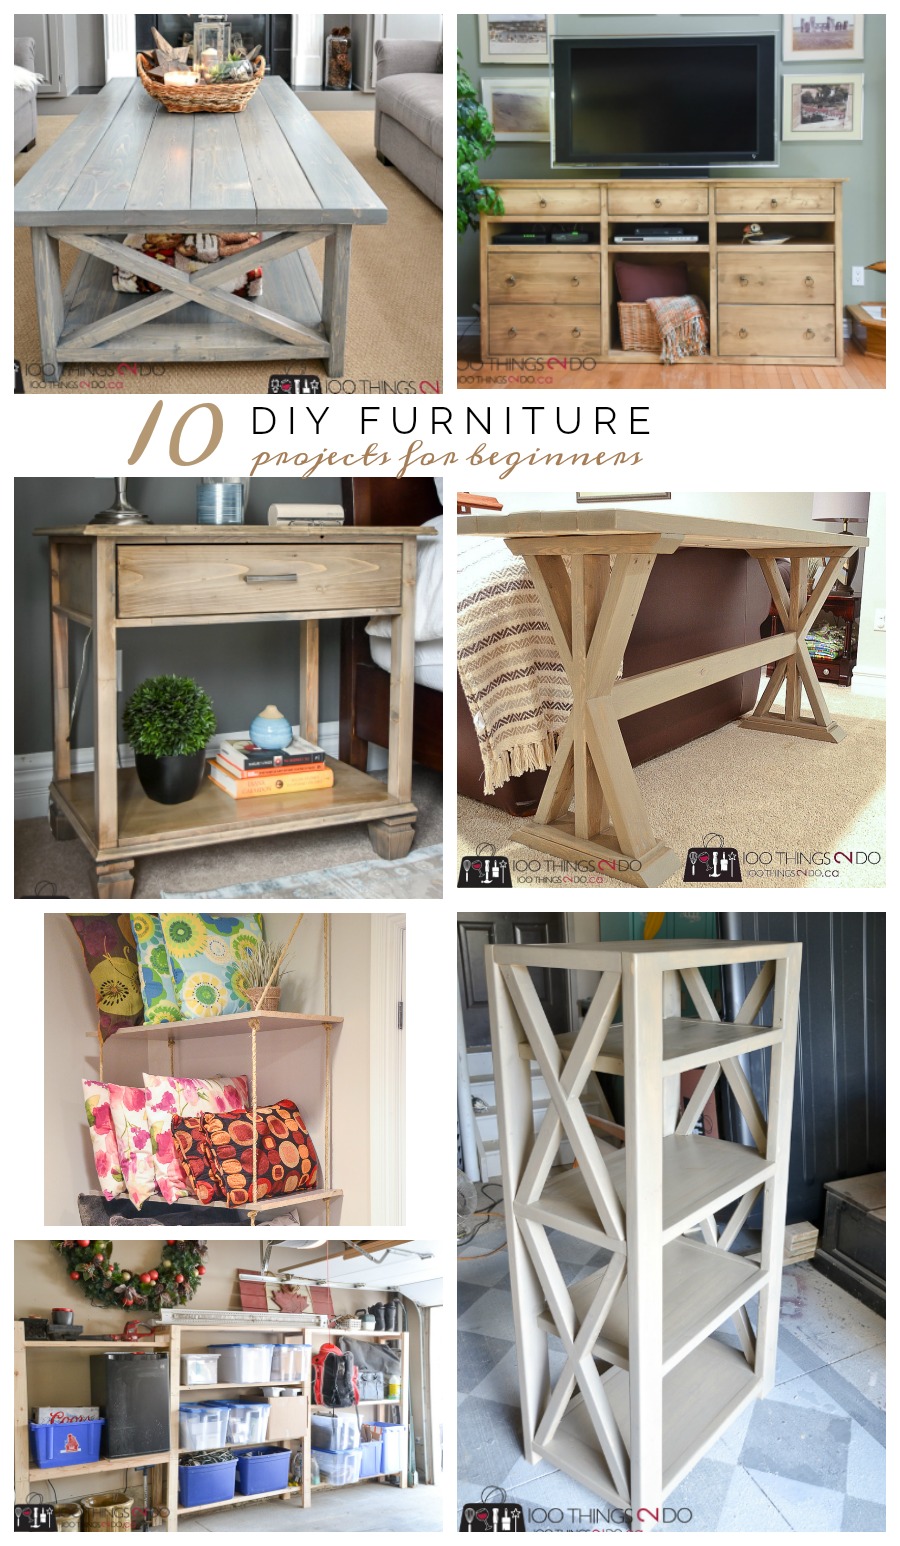 10 DIY Furniture Projects for Beginners, DIY furniture, beginner builds, easy DIY furniture,